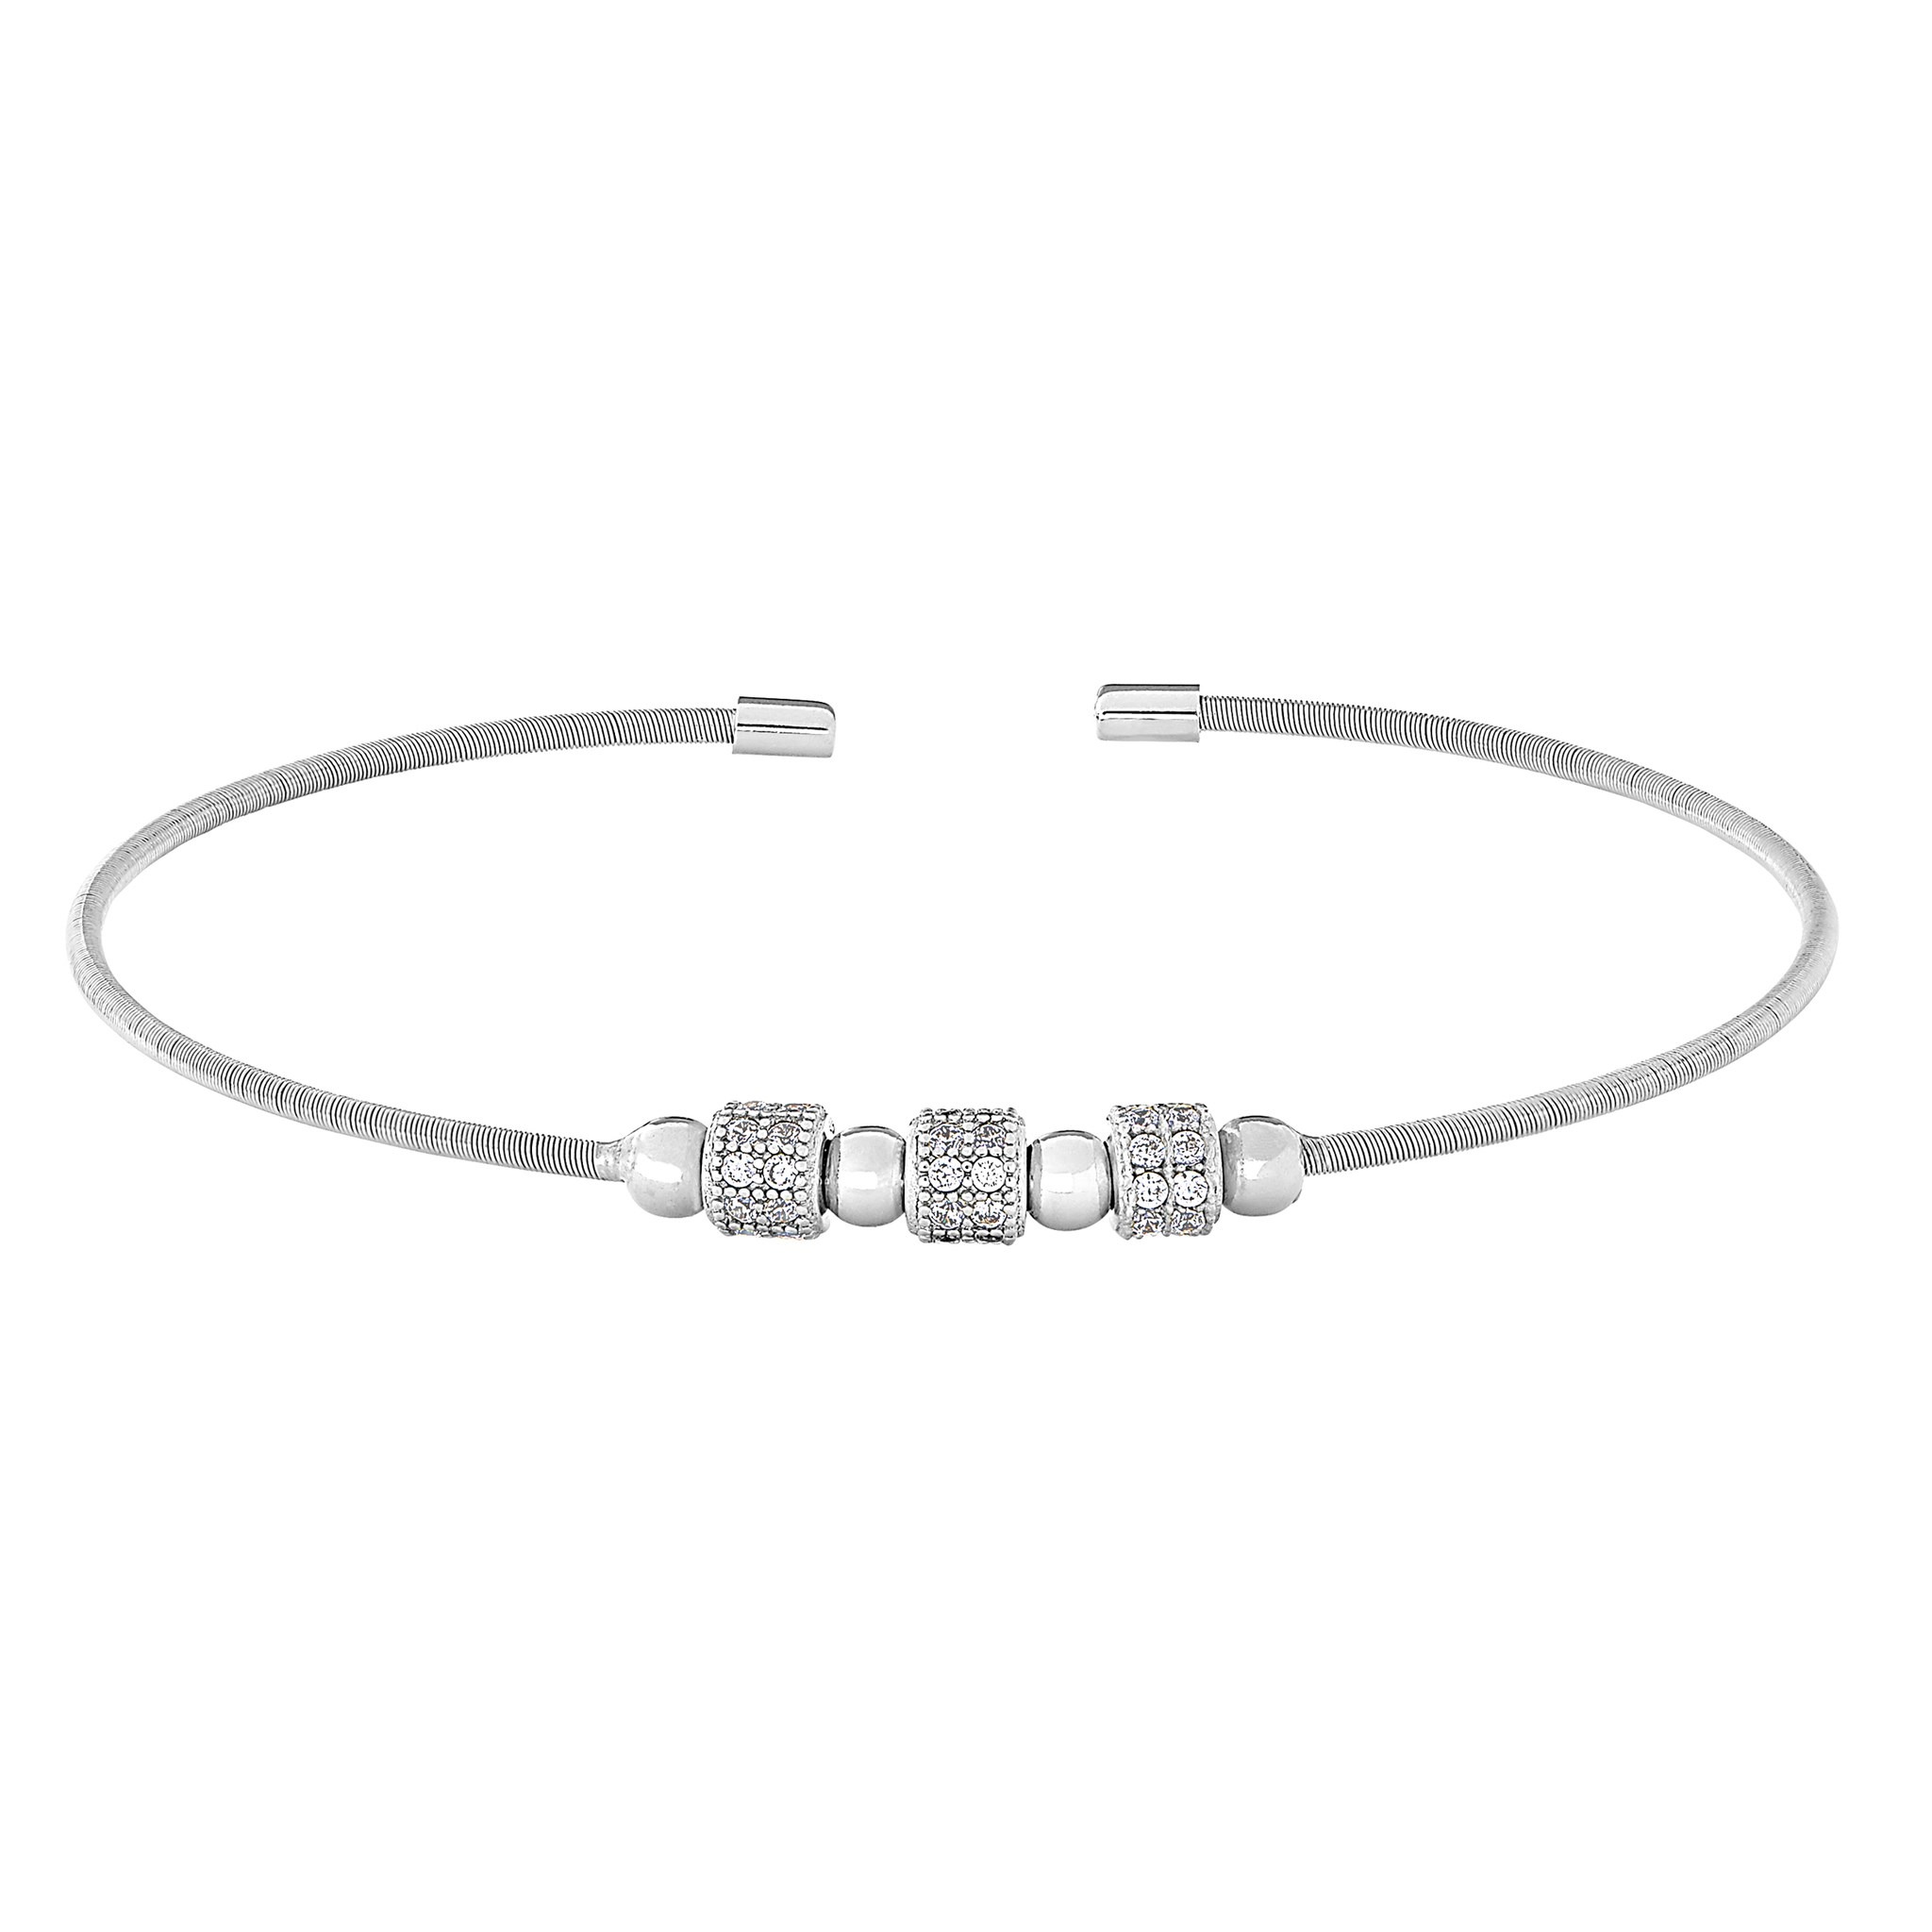 Rhodium Finish Sterling Silver Cable Cuff Bracelet w/Three Spinning Simulated Diamond Beads